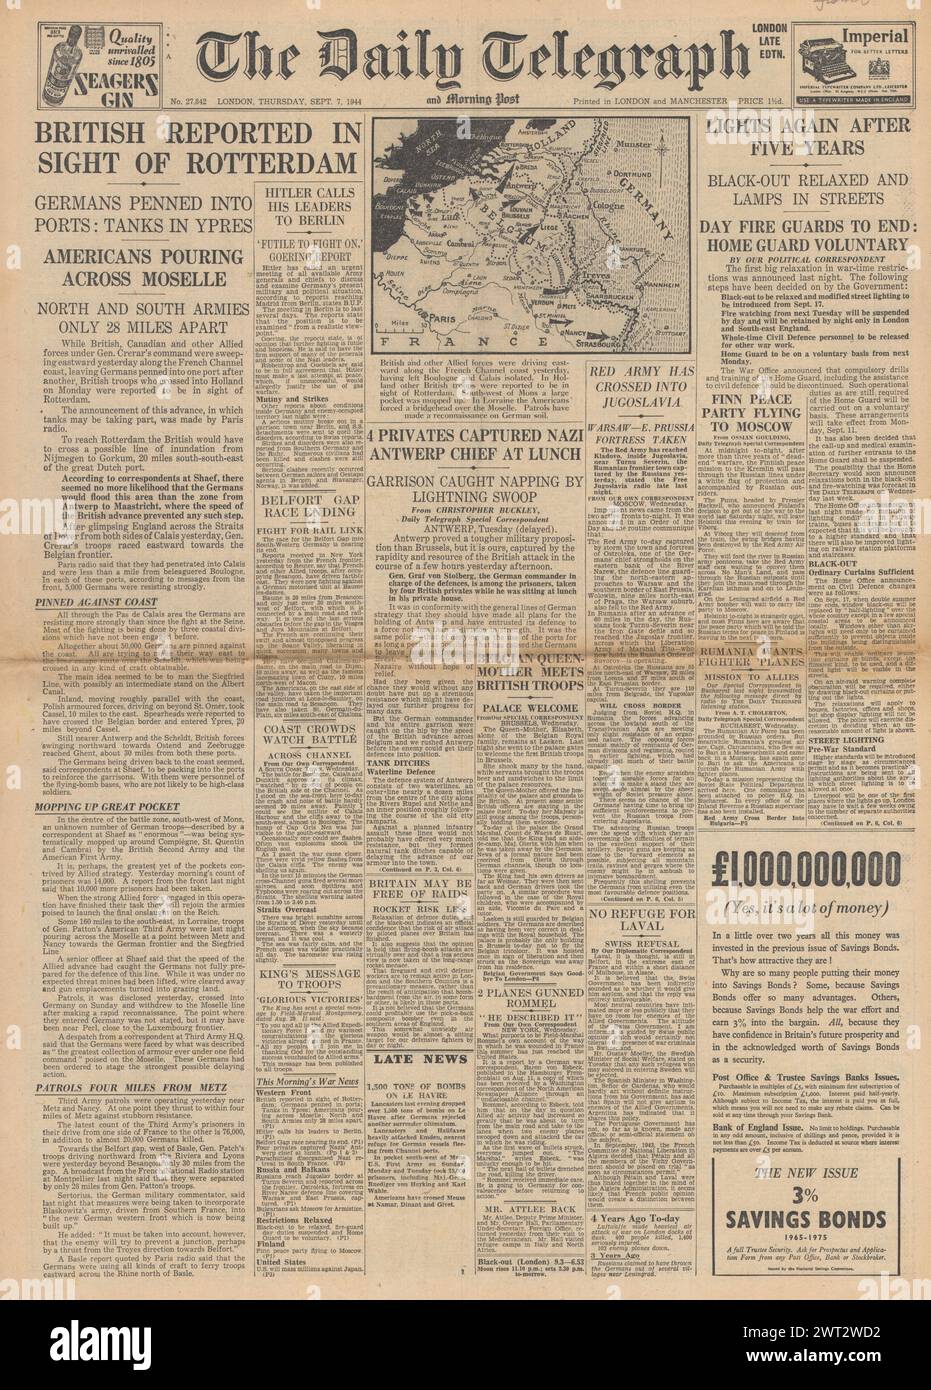 1944 The Daily Telegraph front page reporting British forces near Rotterdam, easing of blackout restrictions, Home Guard training and drills to end and German prisoners of war held in Antwerp Zoo Stock Photo